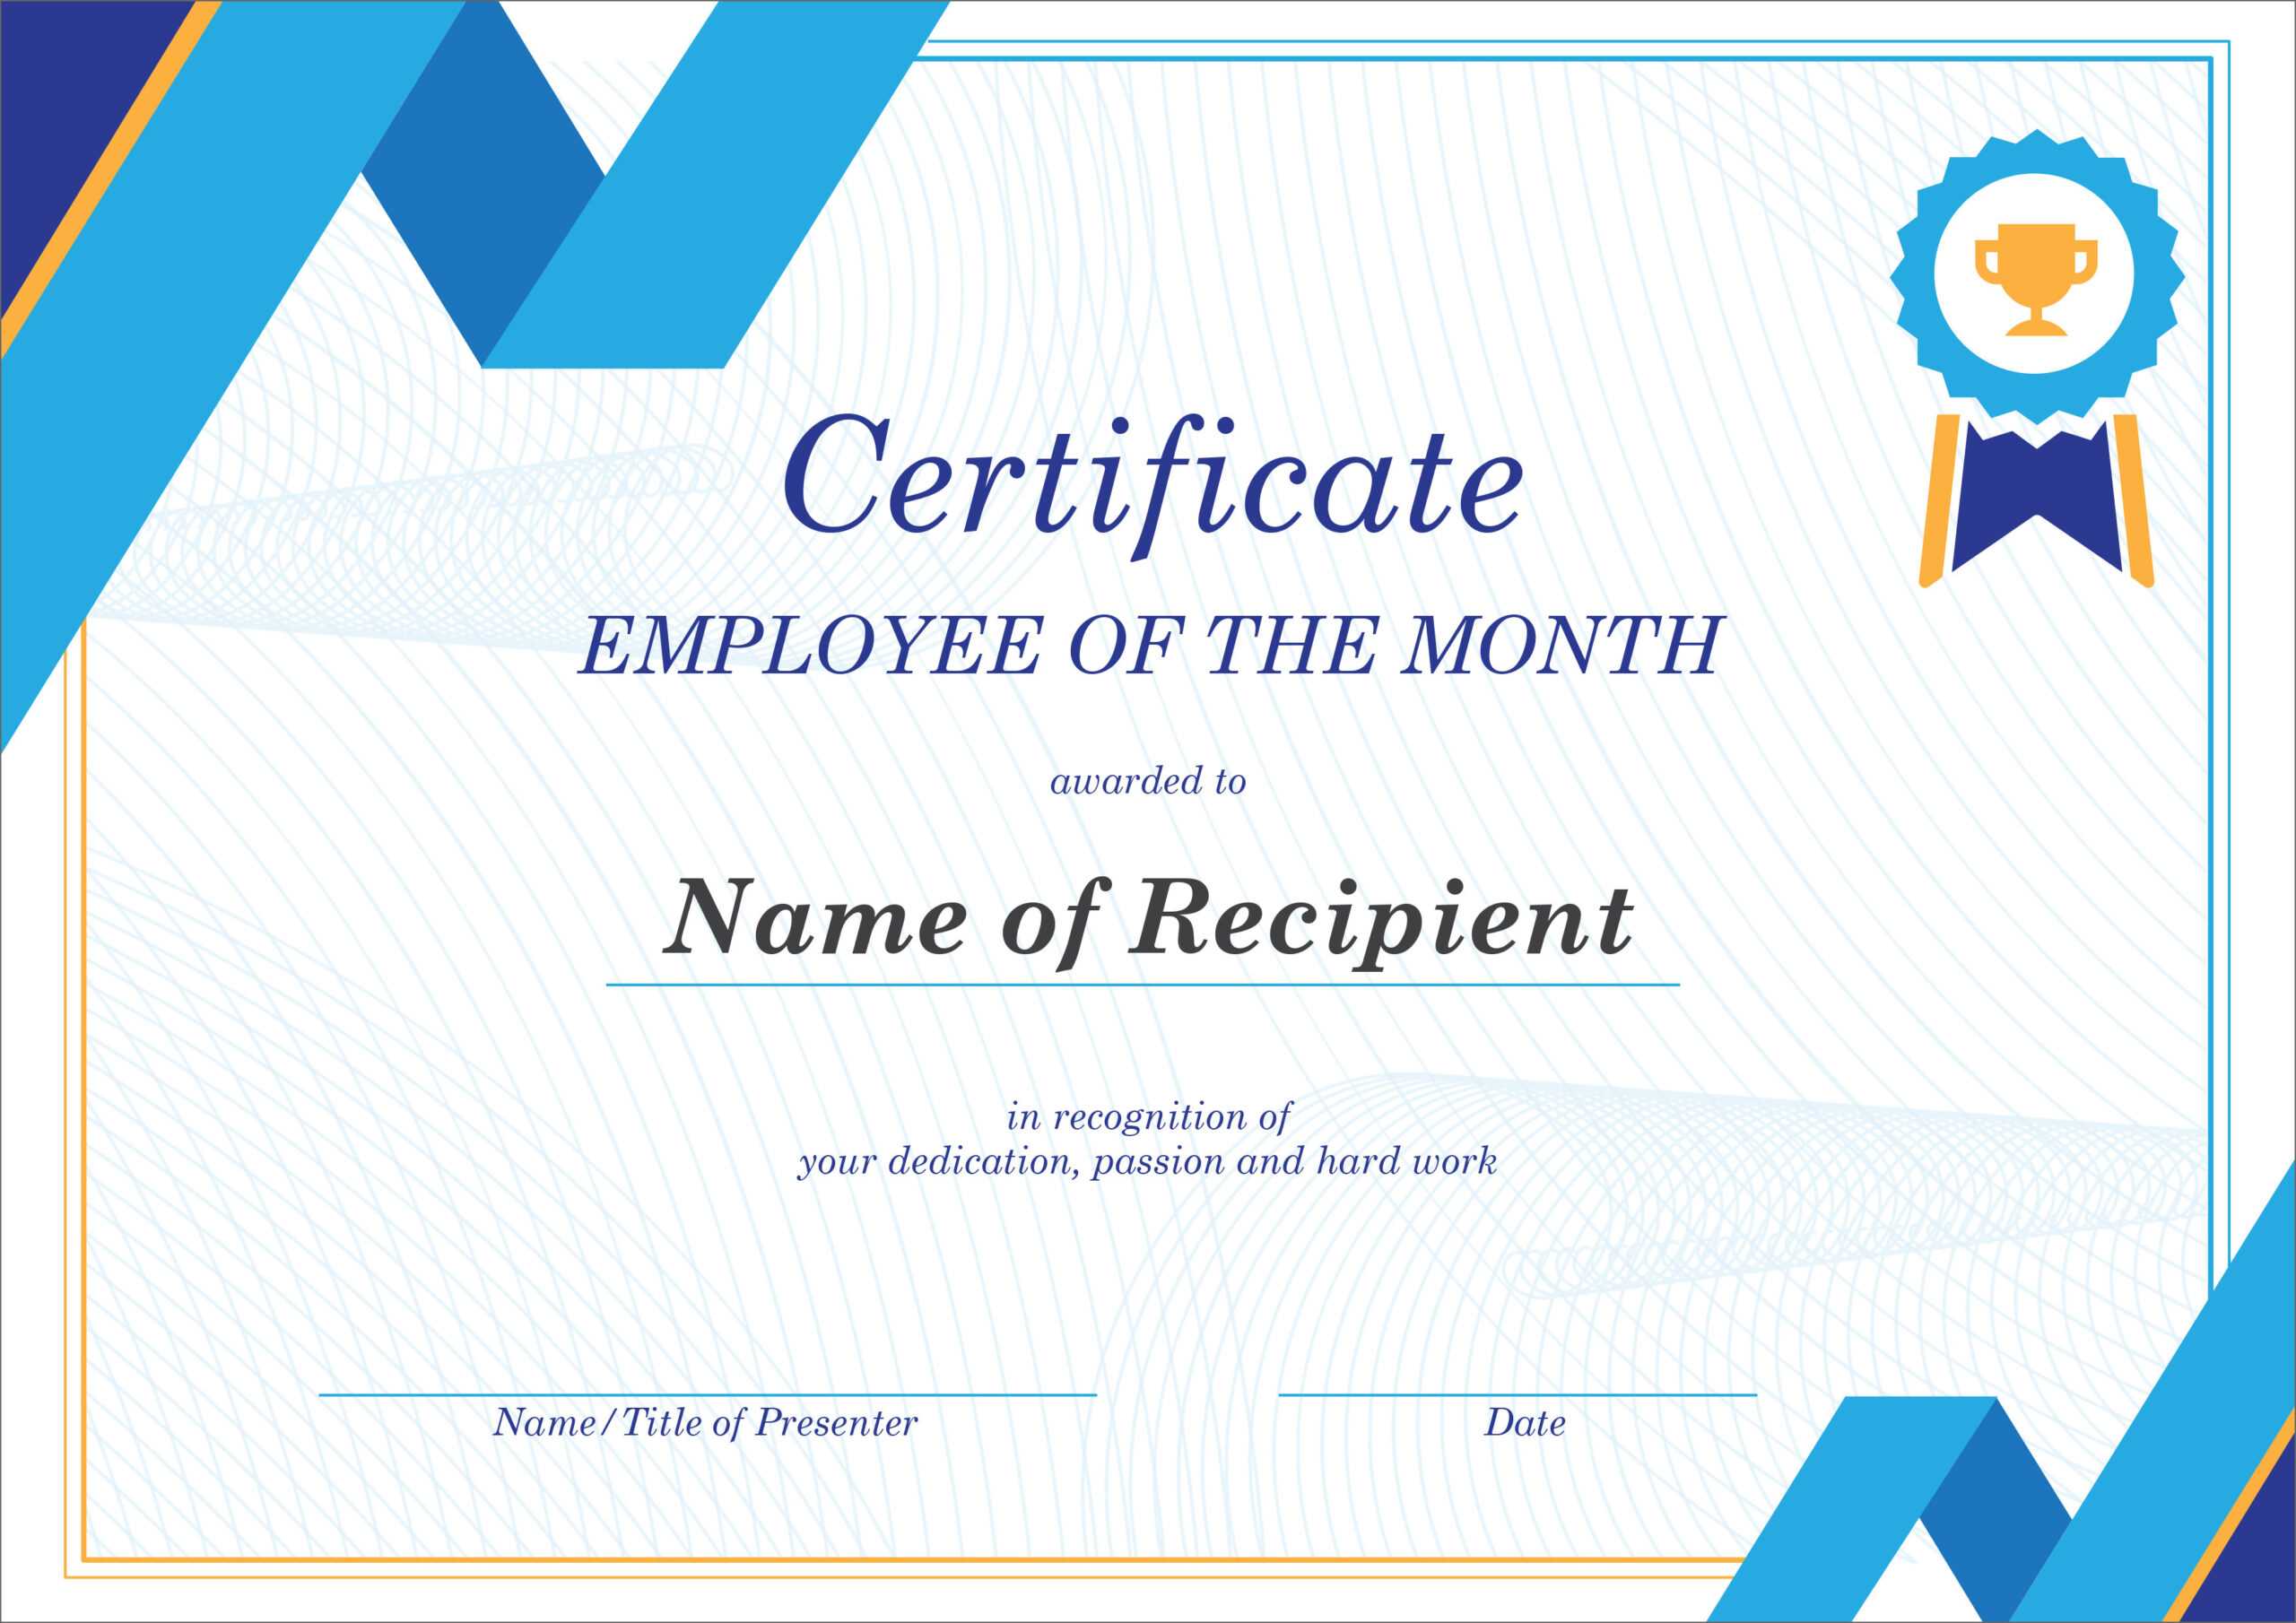 50 Free Creative Blank Certificate Templates In Psd Throughout Best Employee Award Certificate Templates